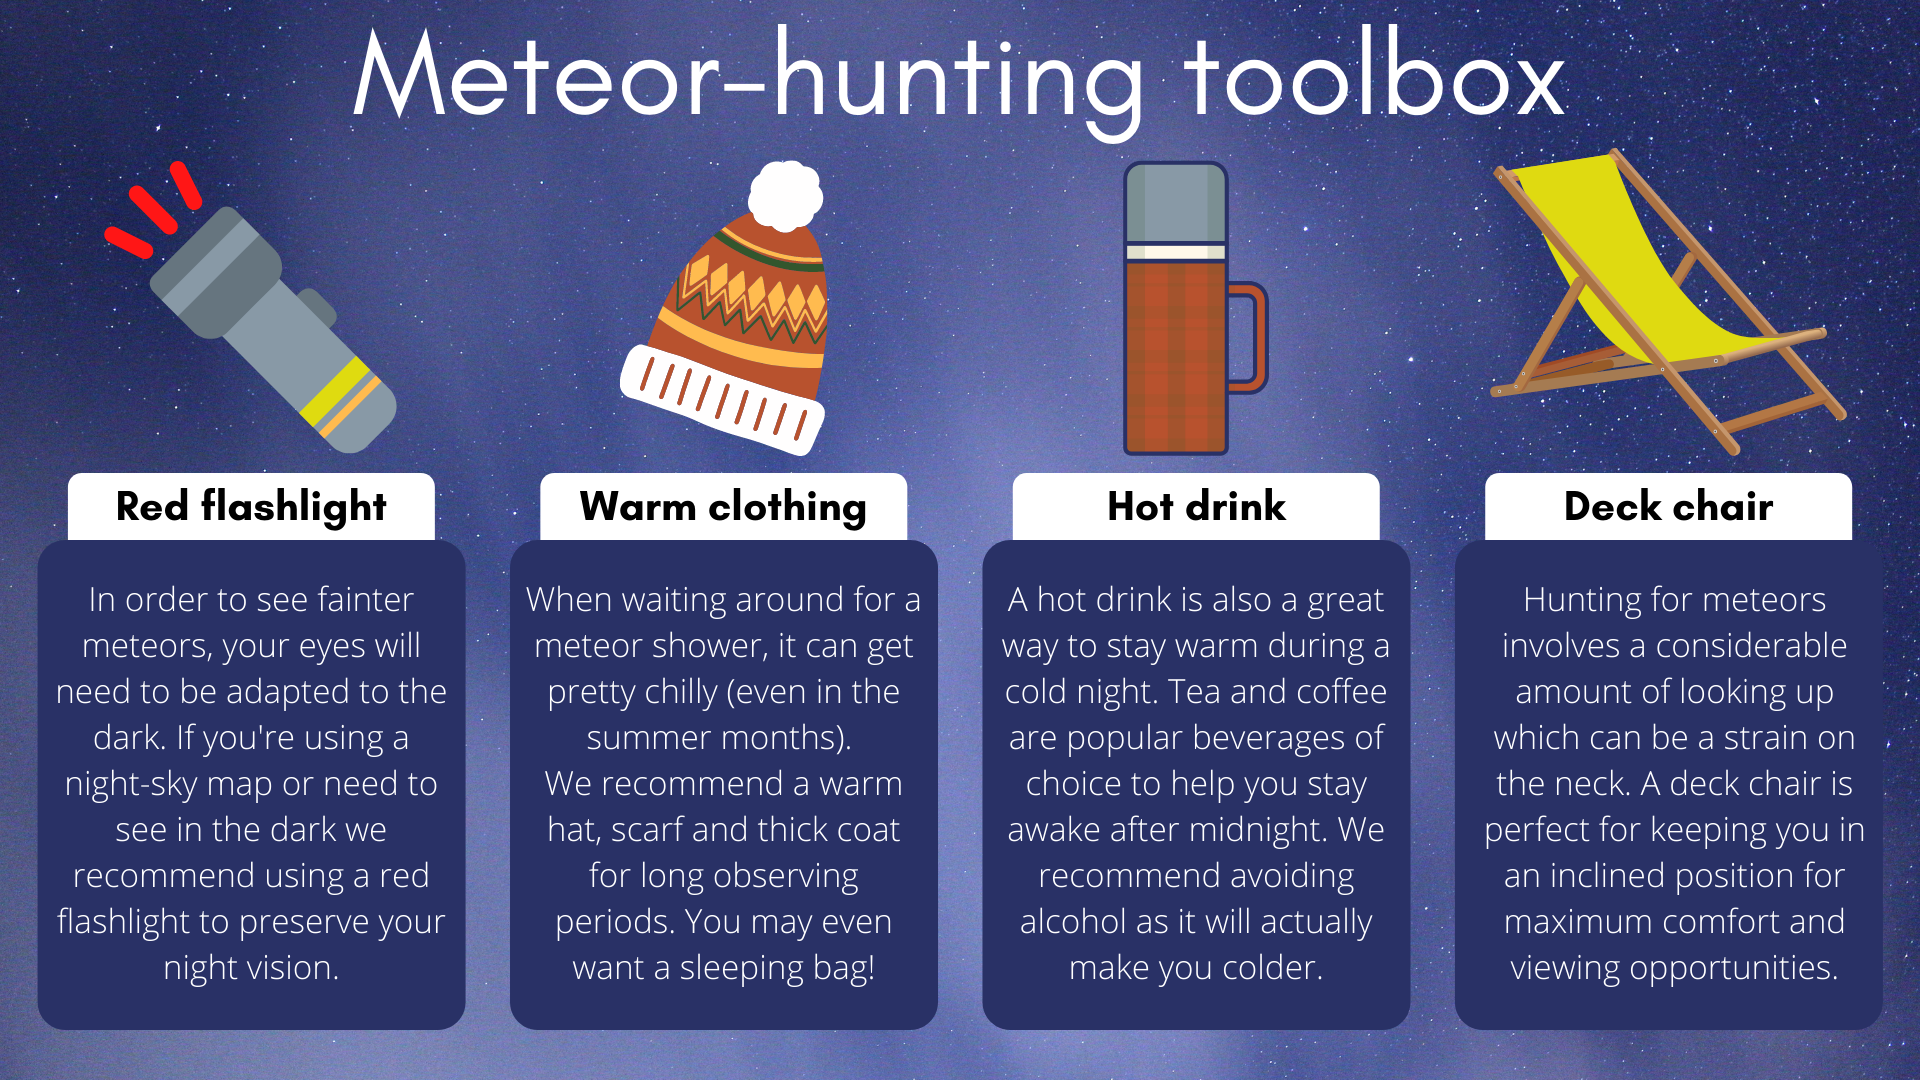 For the perfect meteor hunting experience, you will need a reference flashlight, warm clothing, a hot drink, and a nice deck chair.